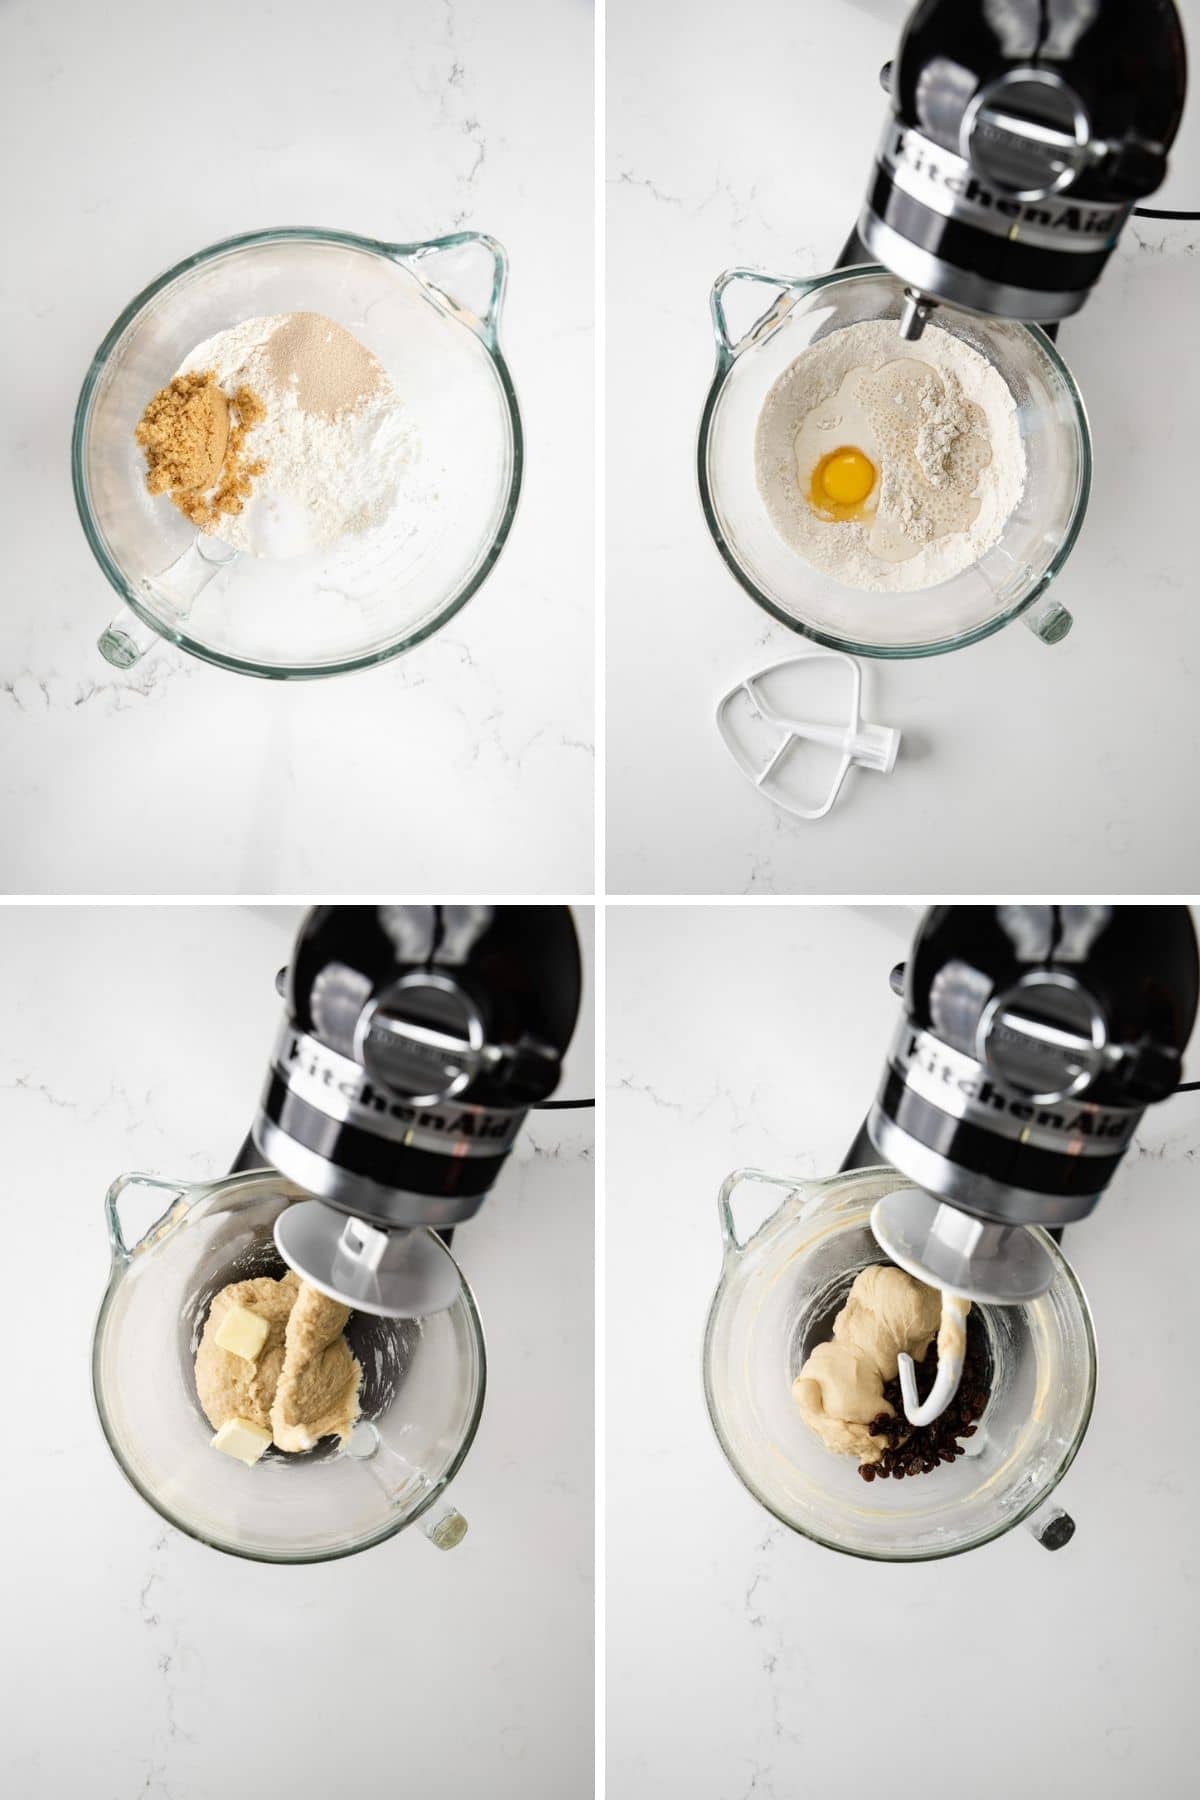 process shots showing dry ingredients in bowl of stand mixer, dry ingredients with egg and milk, wet dough with pads of butter, and fully mixed dough